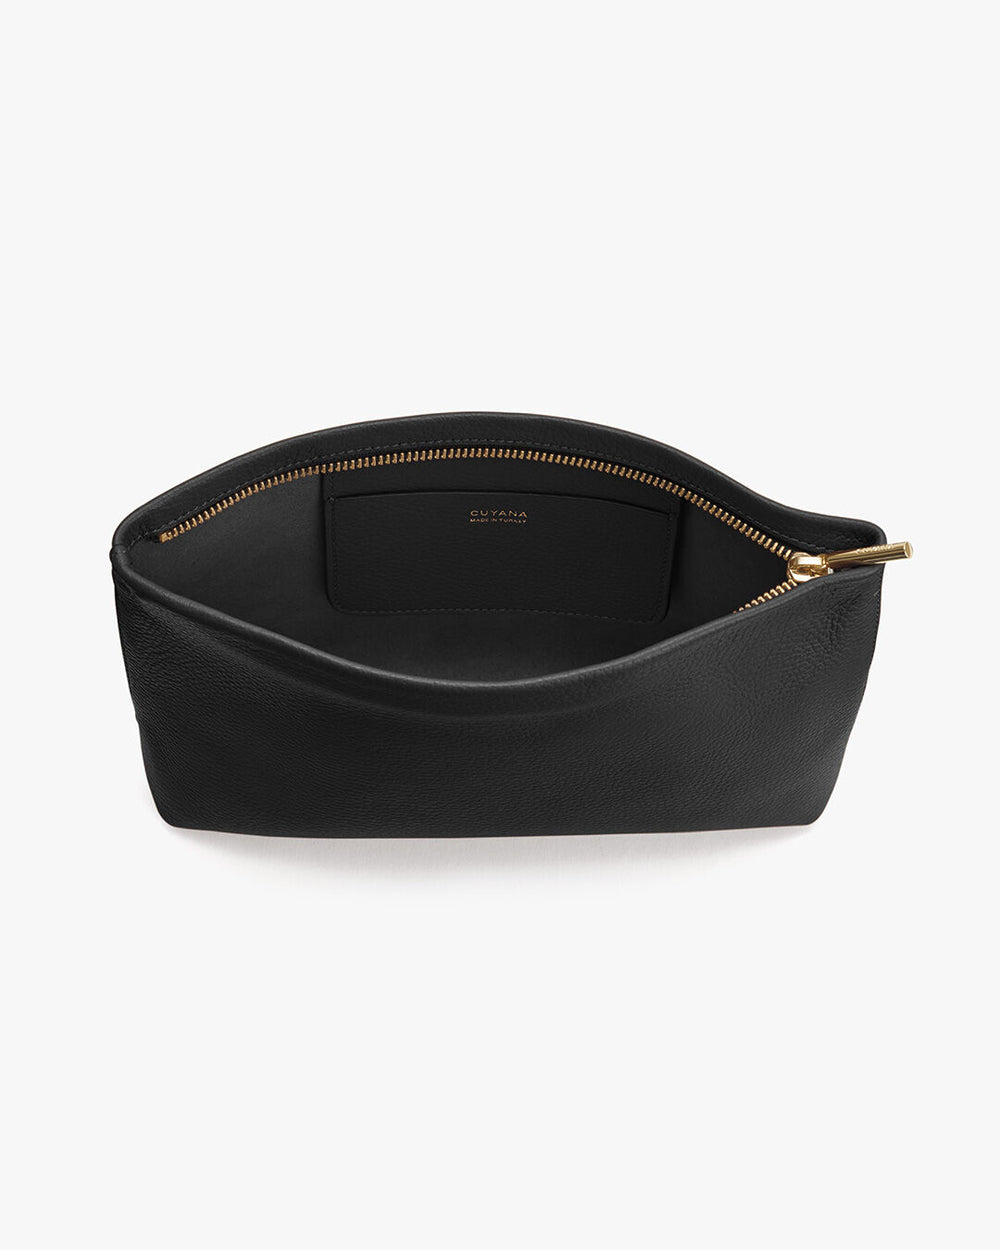 Open black pouch with a zipper on a white background.